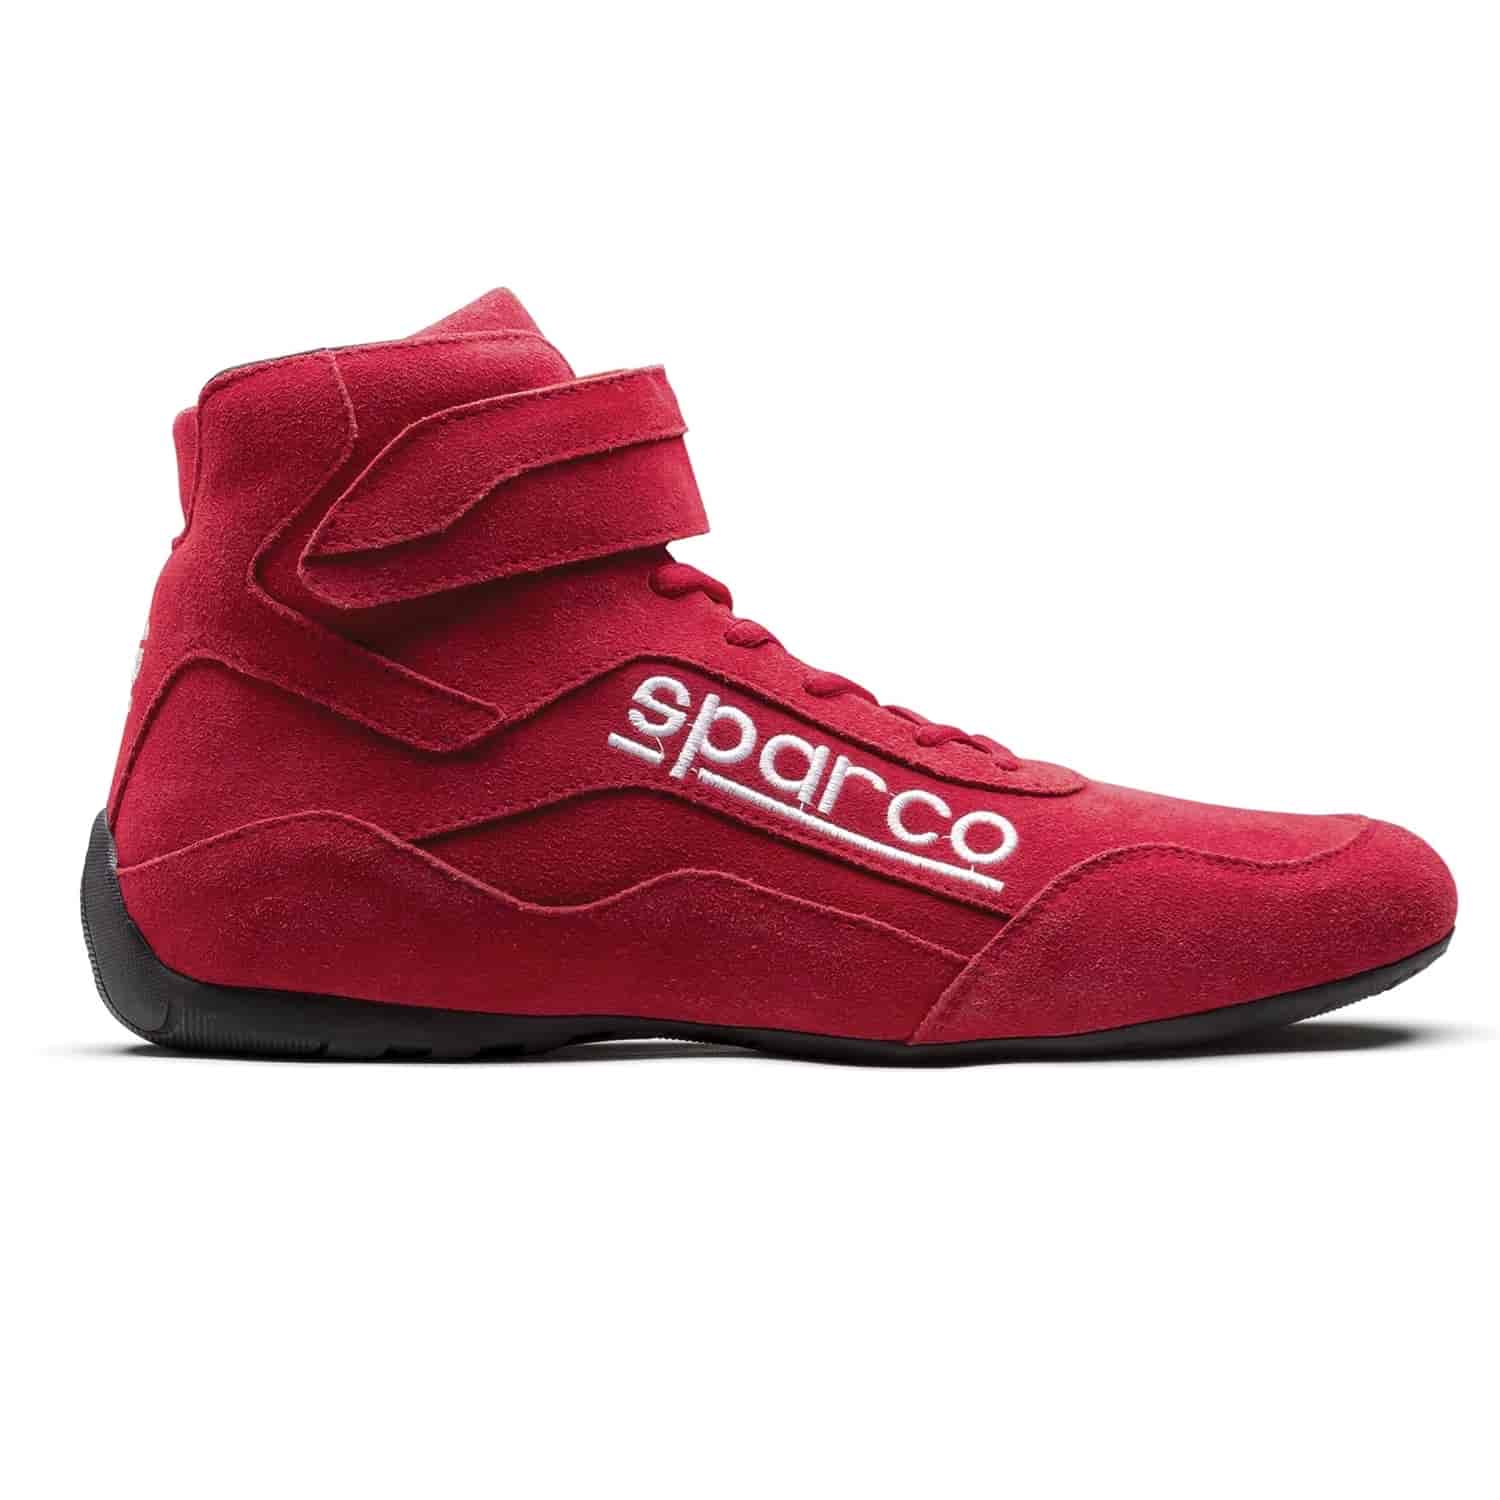 Race 2 Shoe Size 10.5 - Red